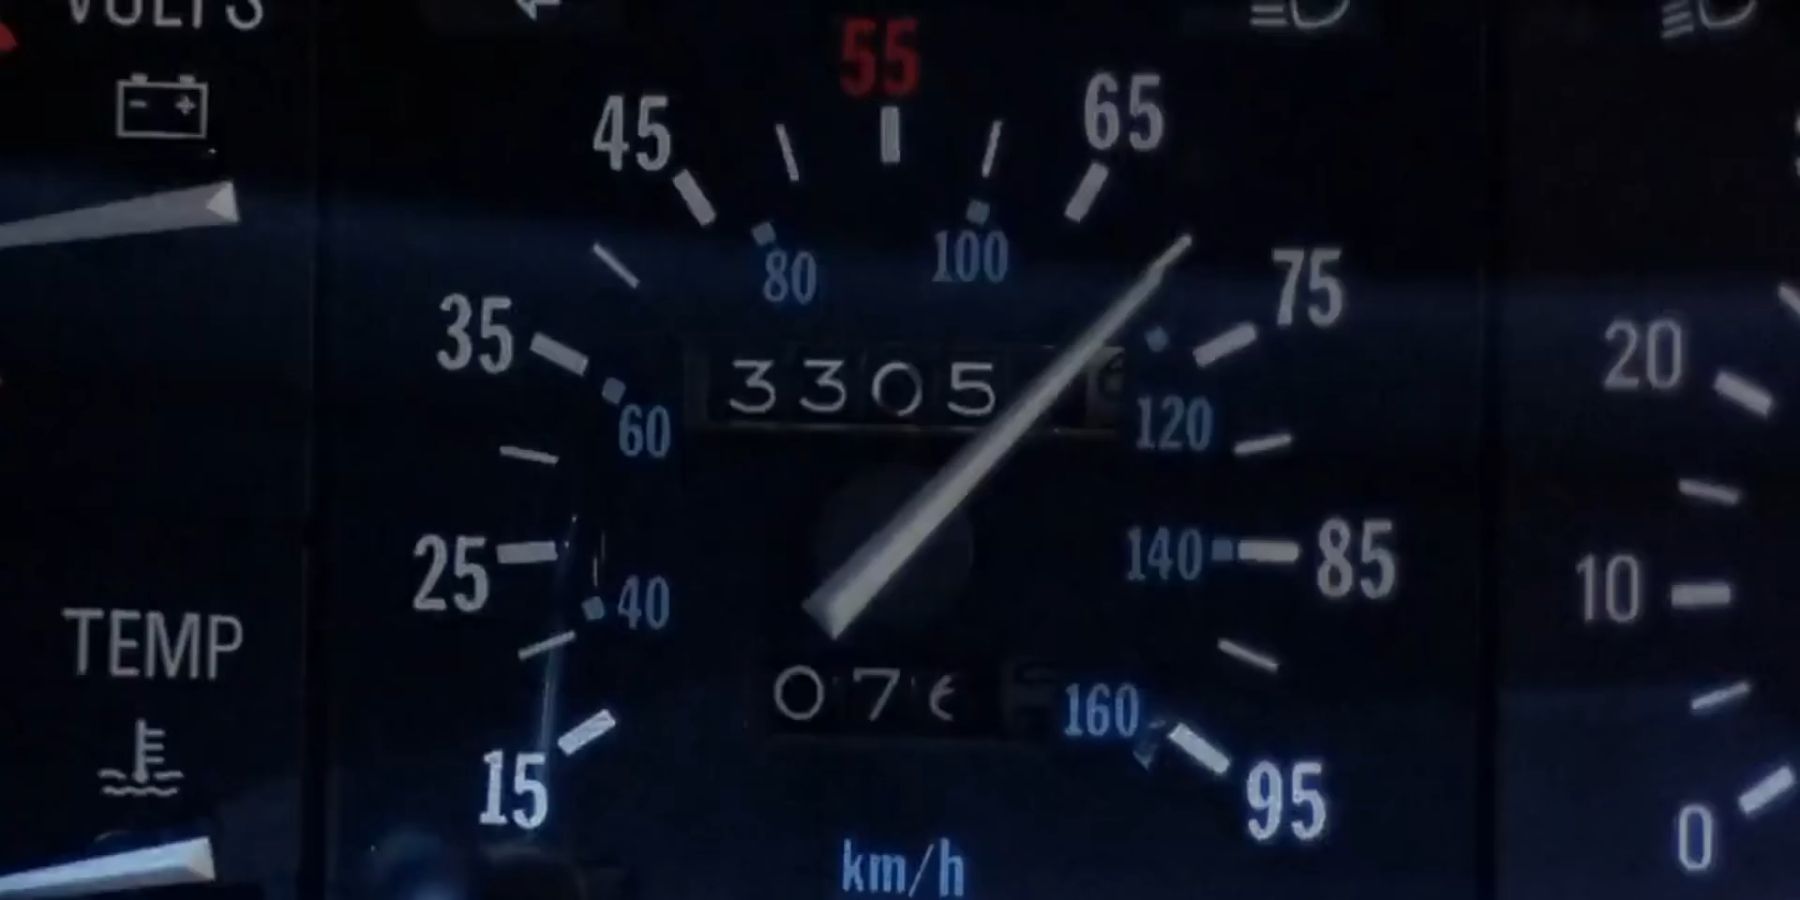 Closeup shot of the speedometer inside the DeLorean in Back To The Future